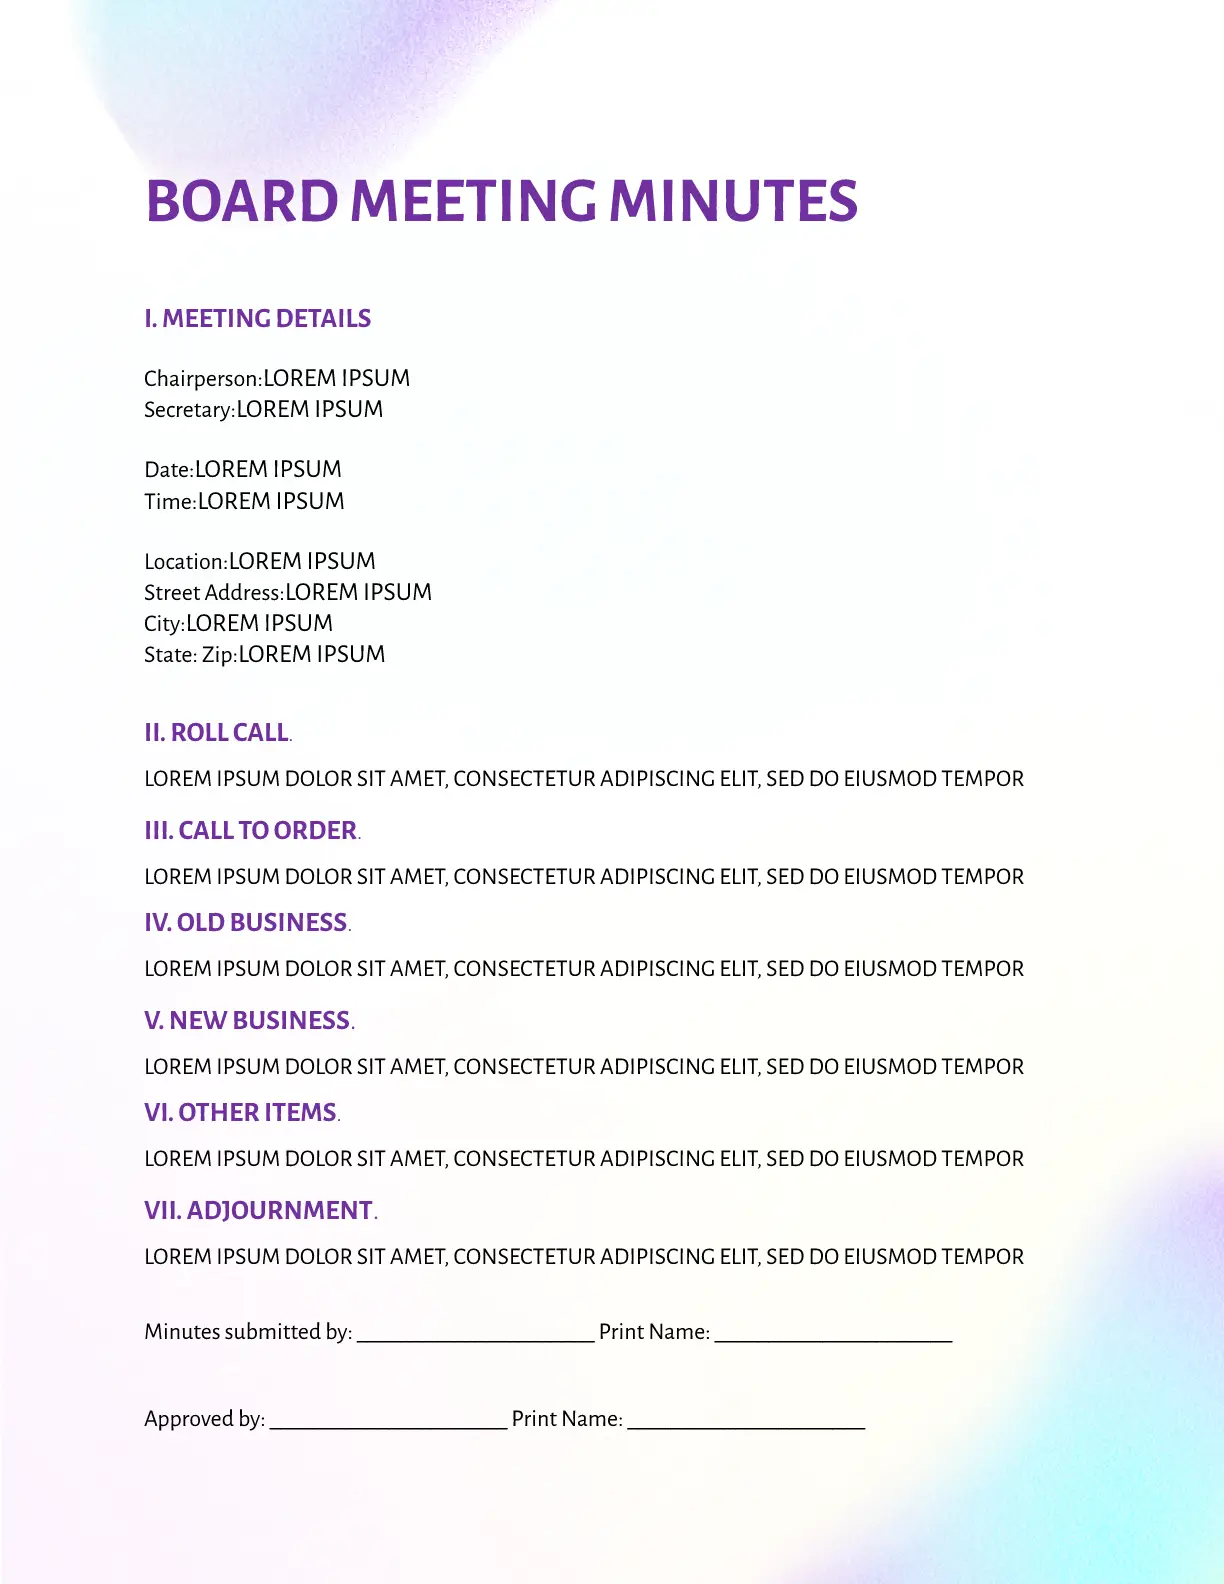 Board Meeting Minutes for Google Docs